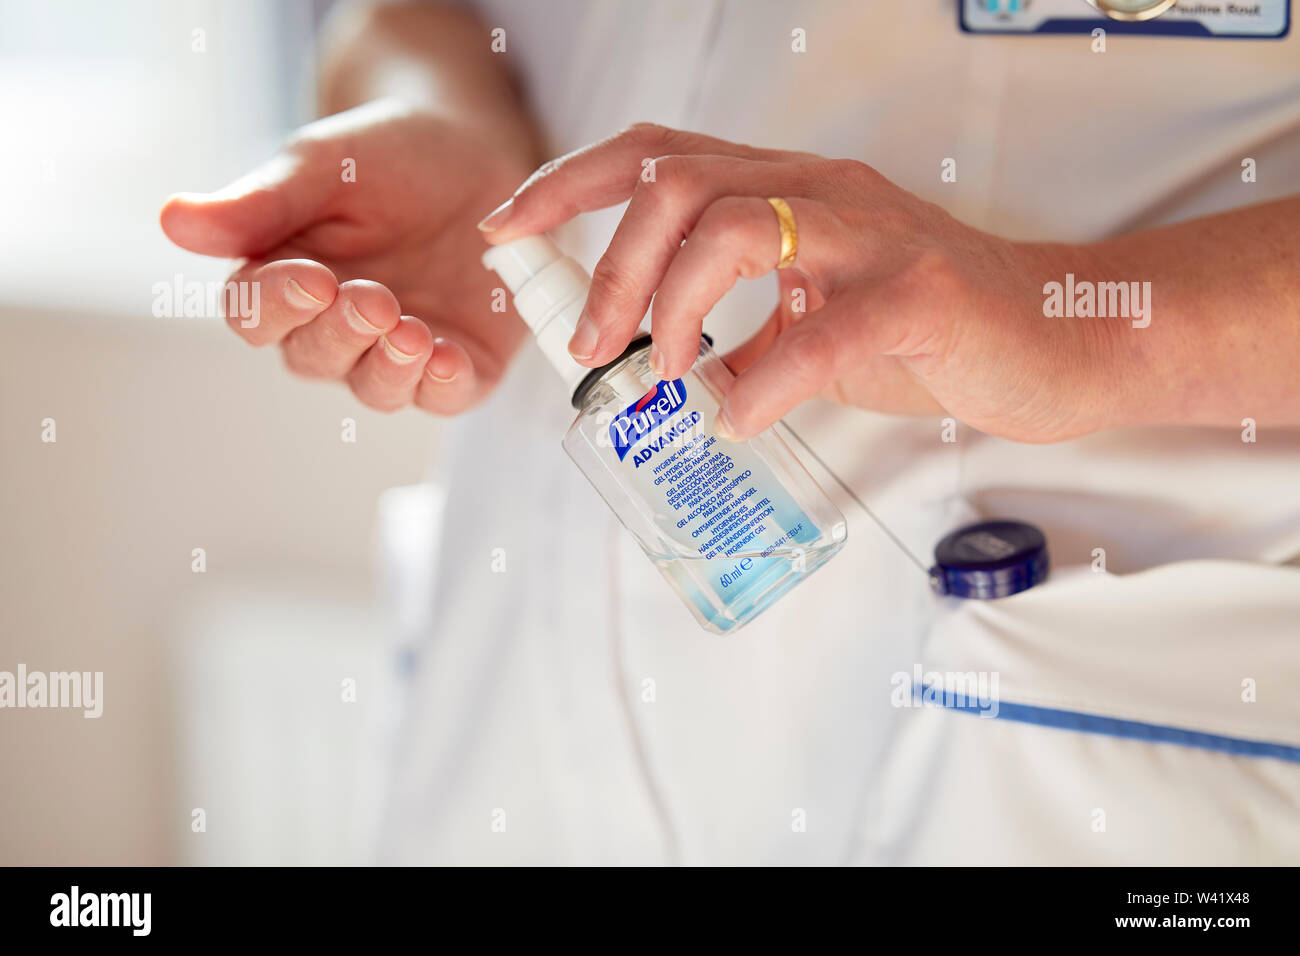 Nurse cleansing hands Stock Photo